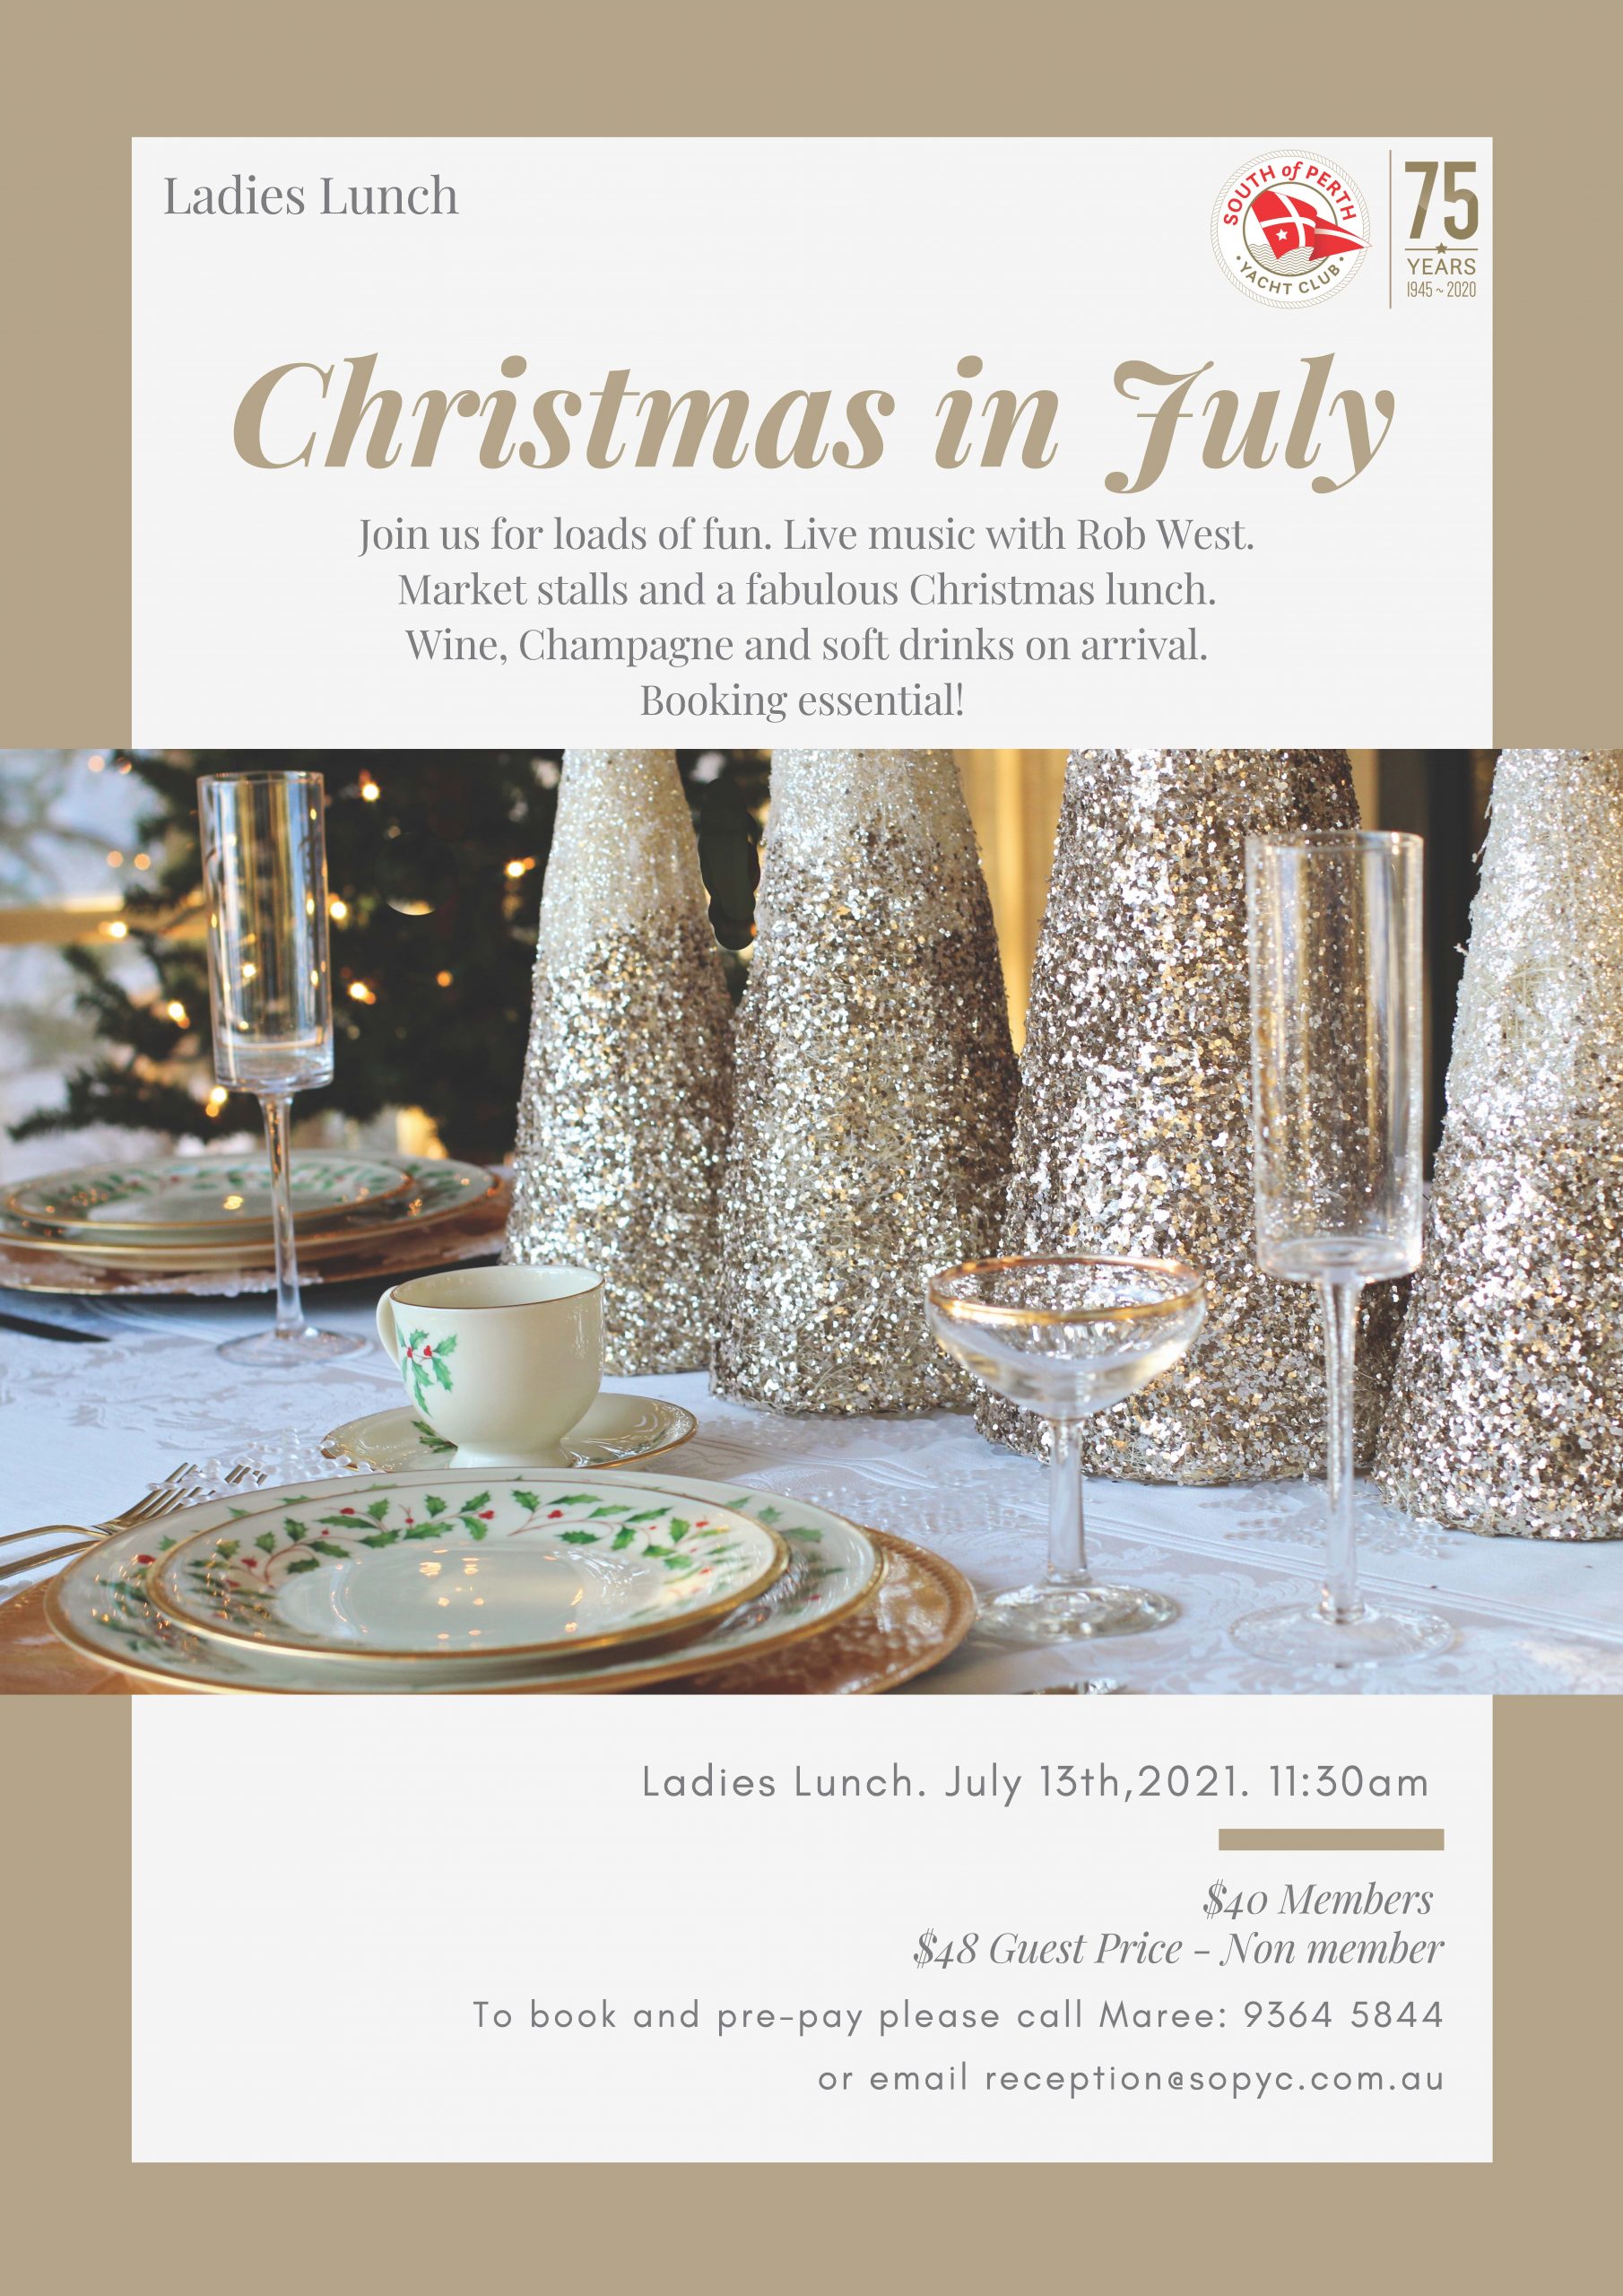 Ladies Lunch - Christmas in July